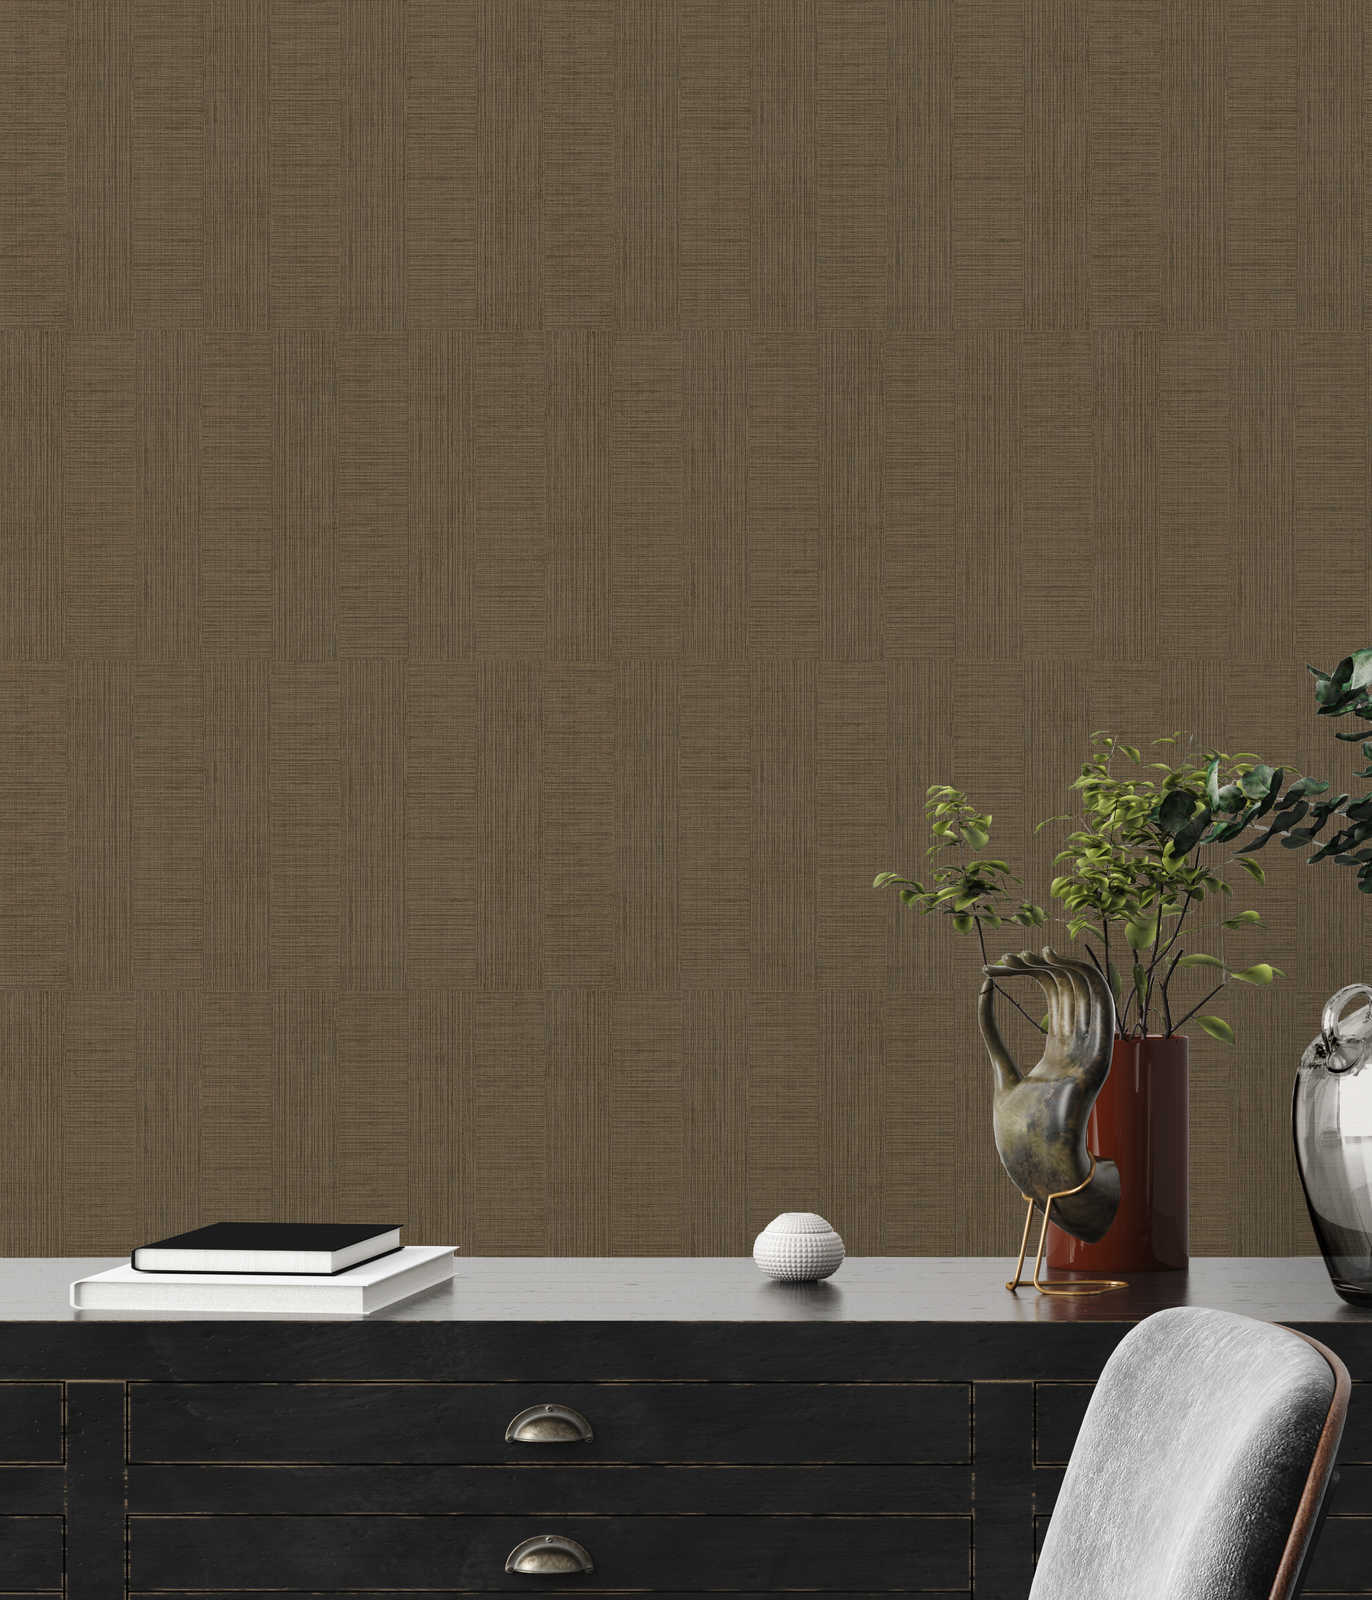             Wallpaper mottled with rectangle pattern in retro style - brown
        